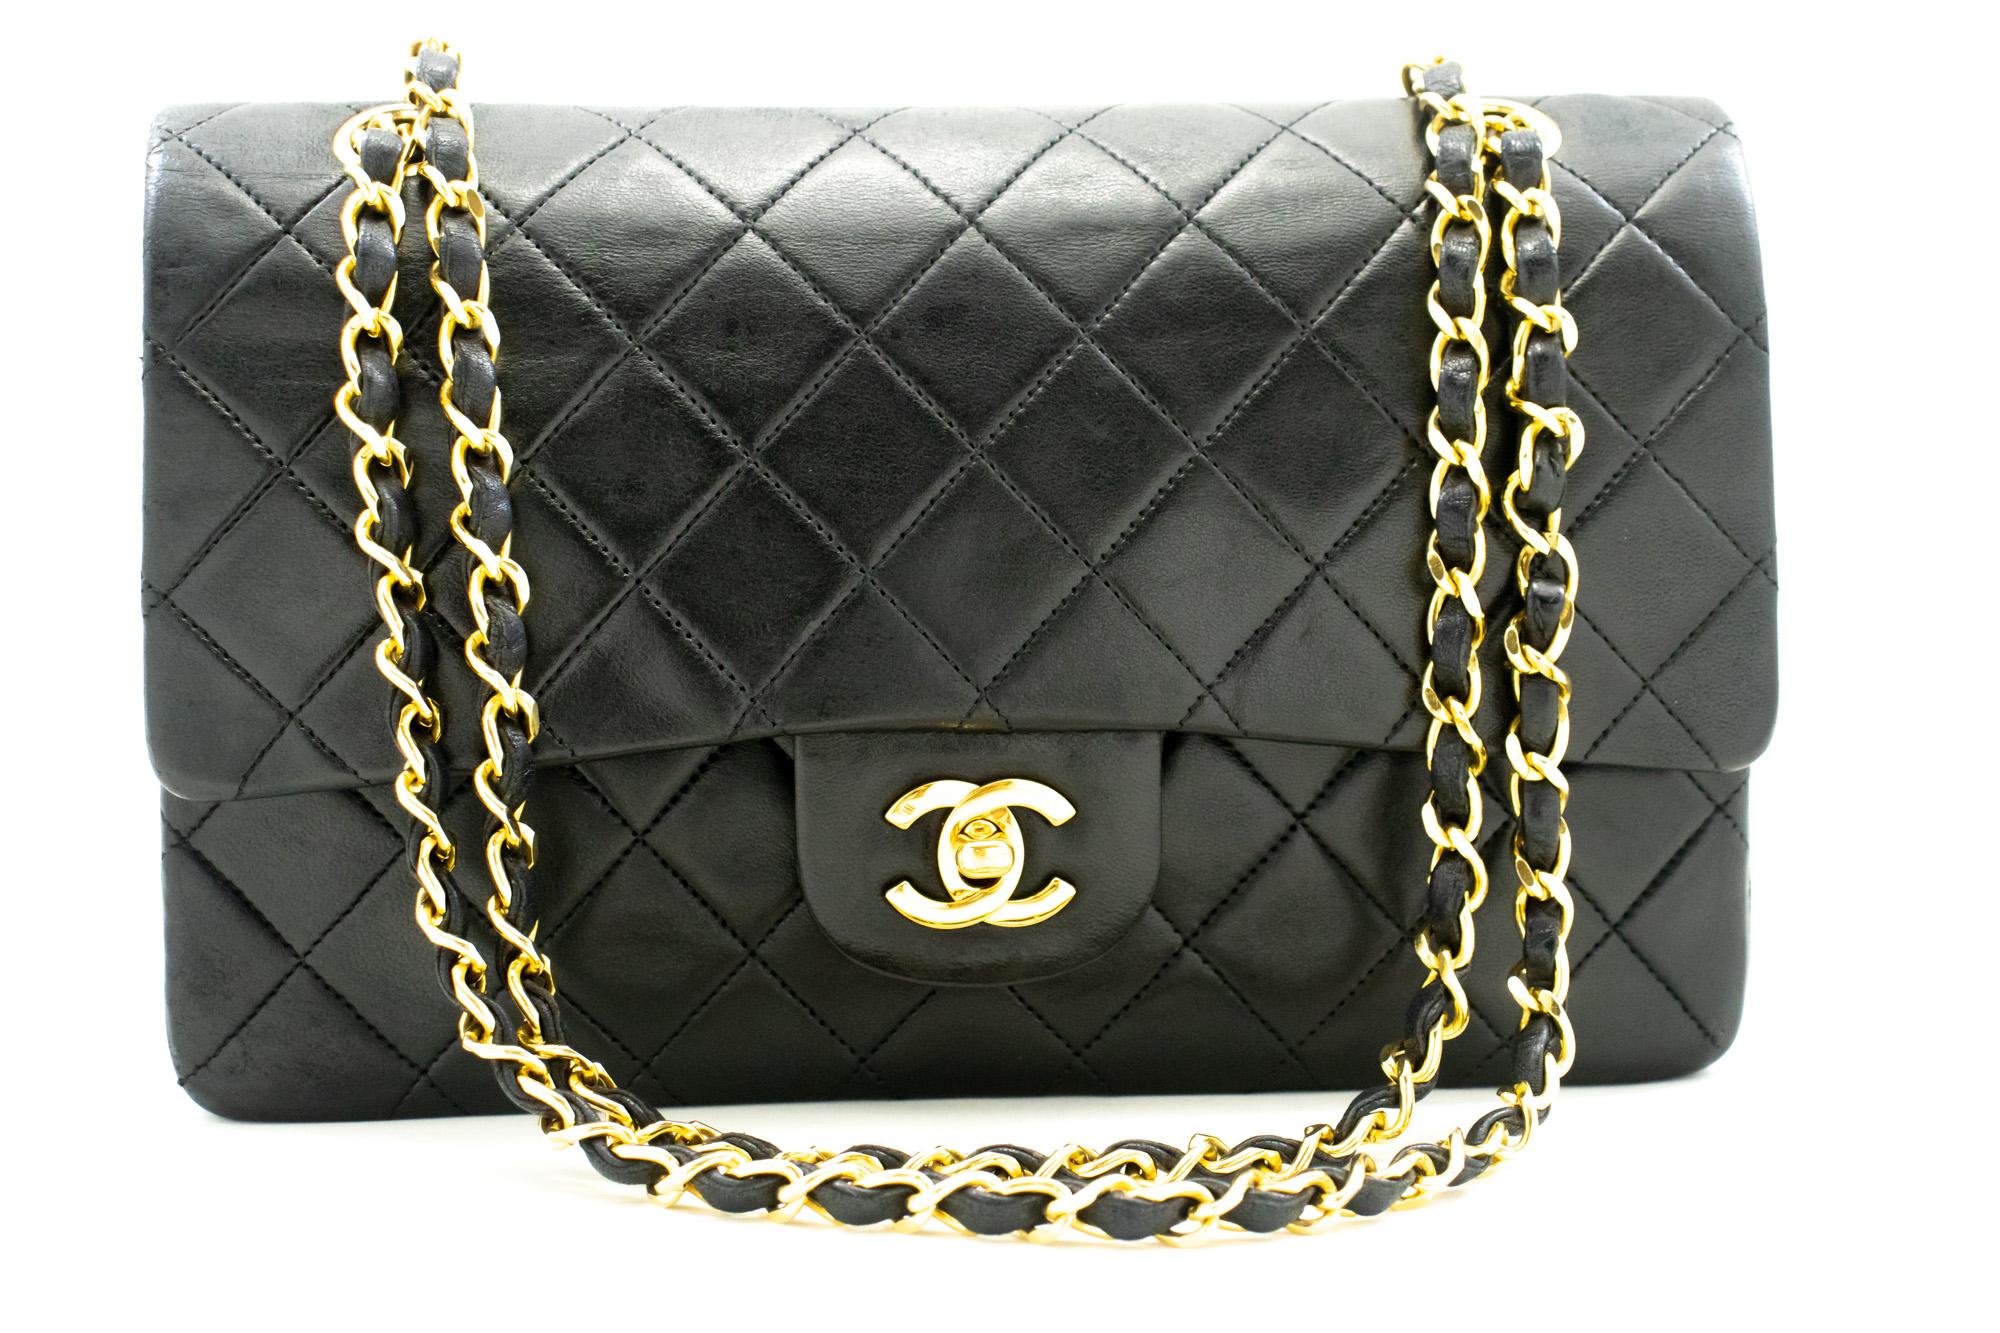 An authentic CHANEL Classic Double Flap 10